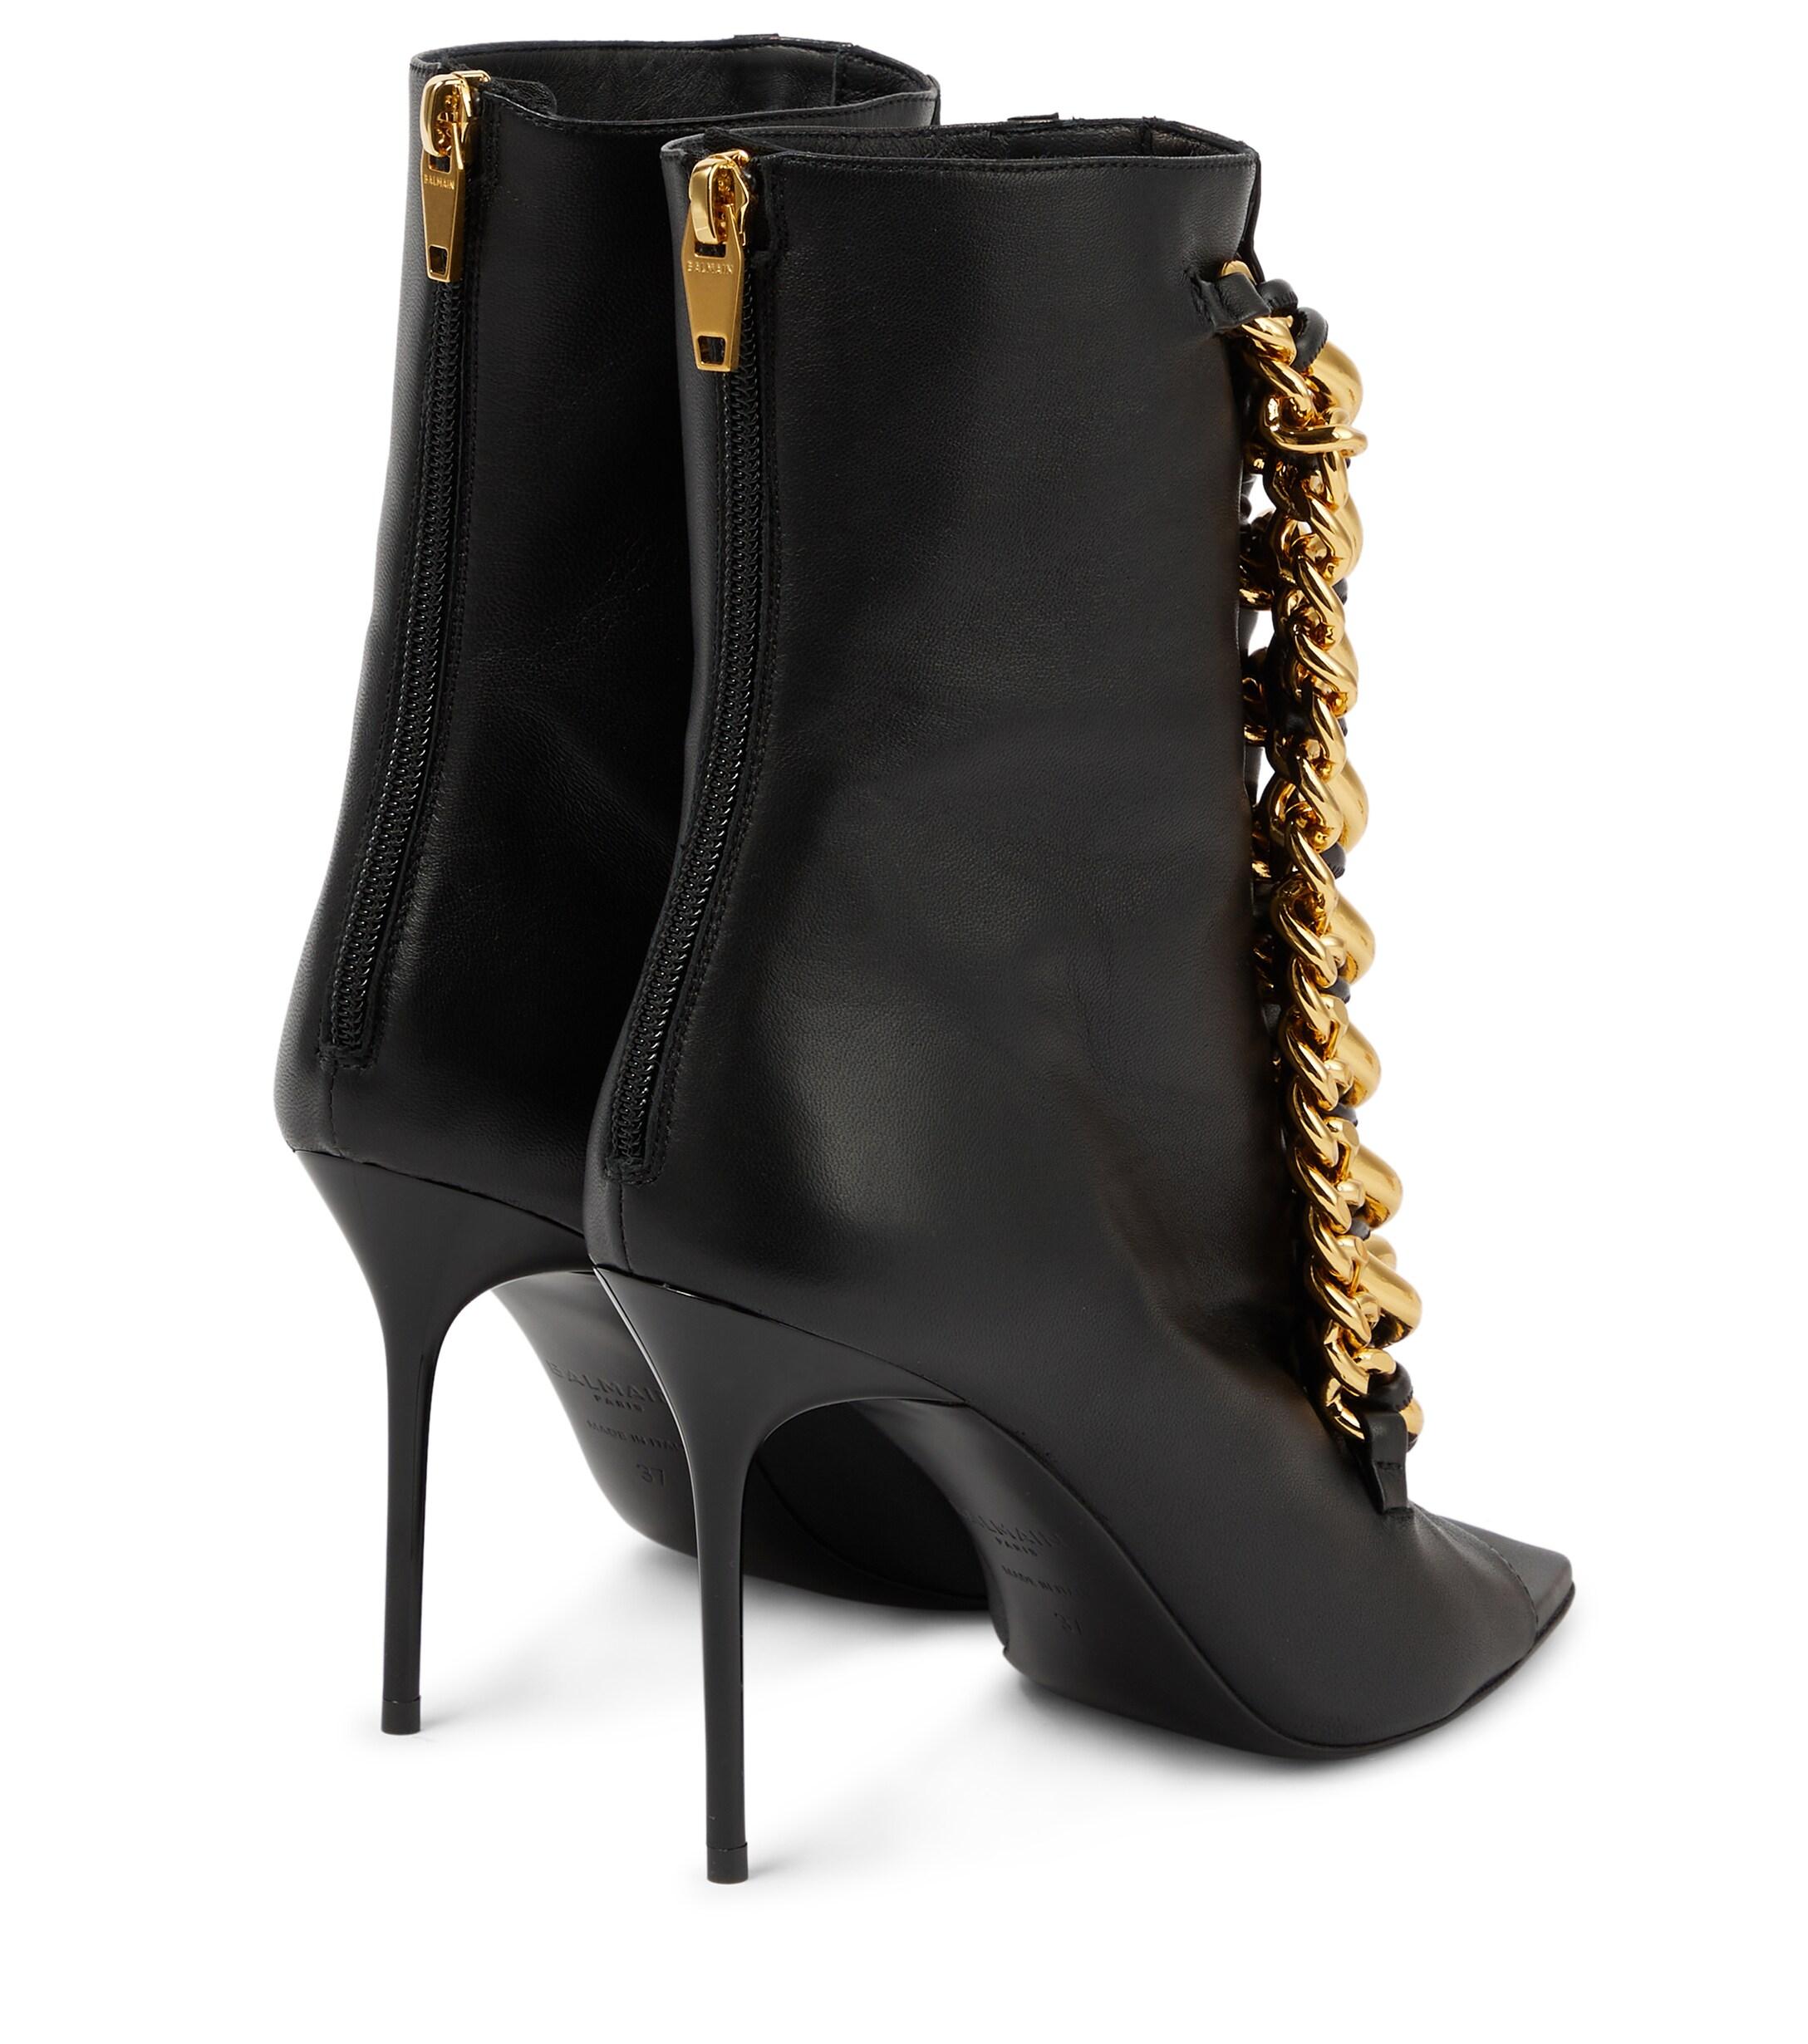 Balmain Embellished Leather Ankle Boots in Black | Lyst